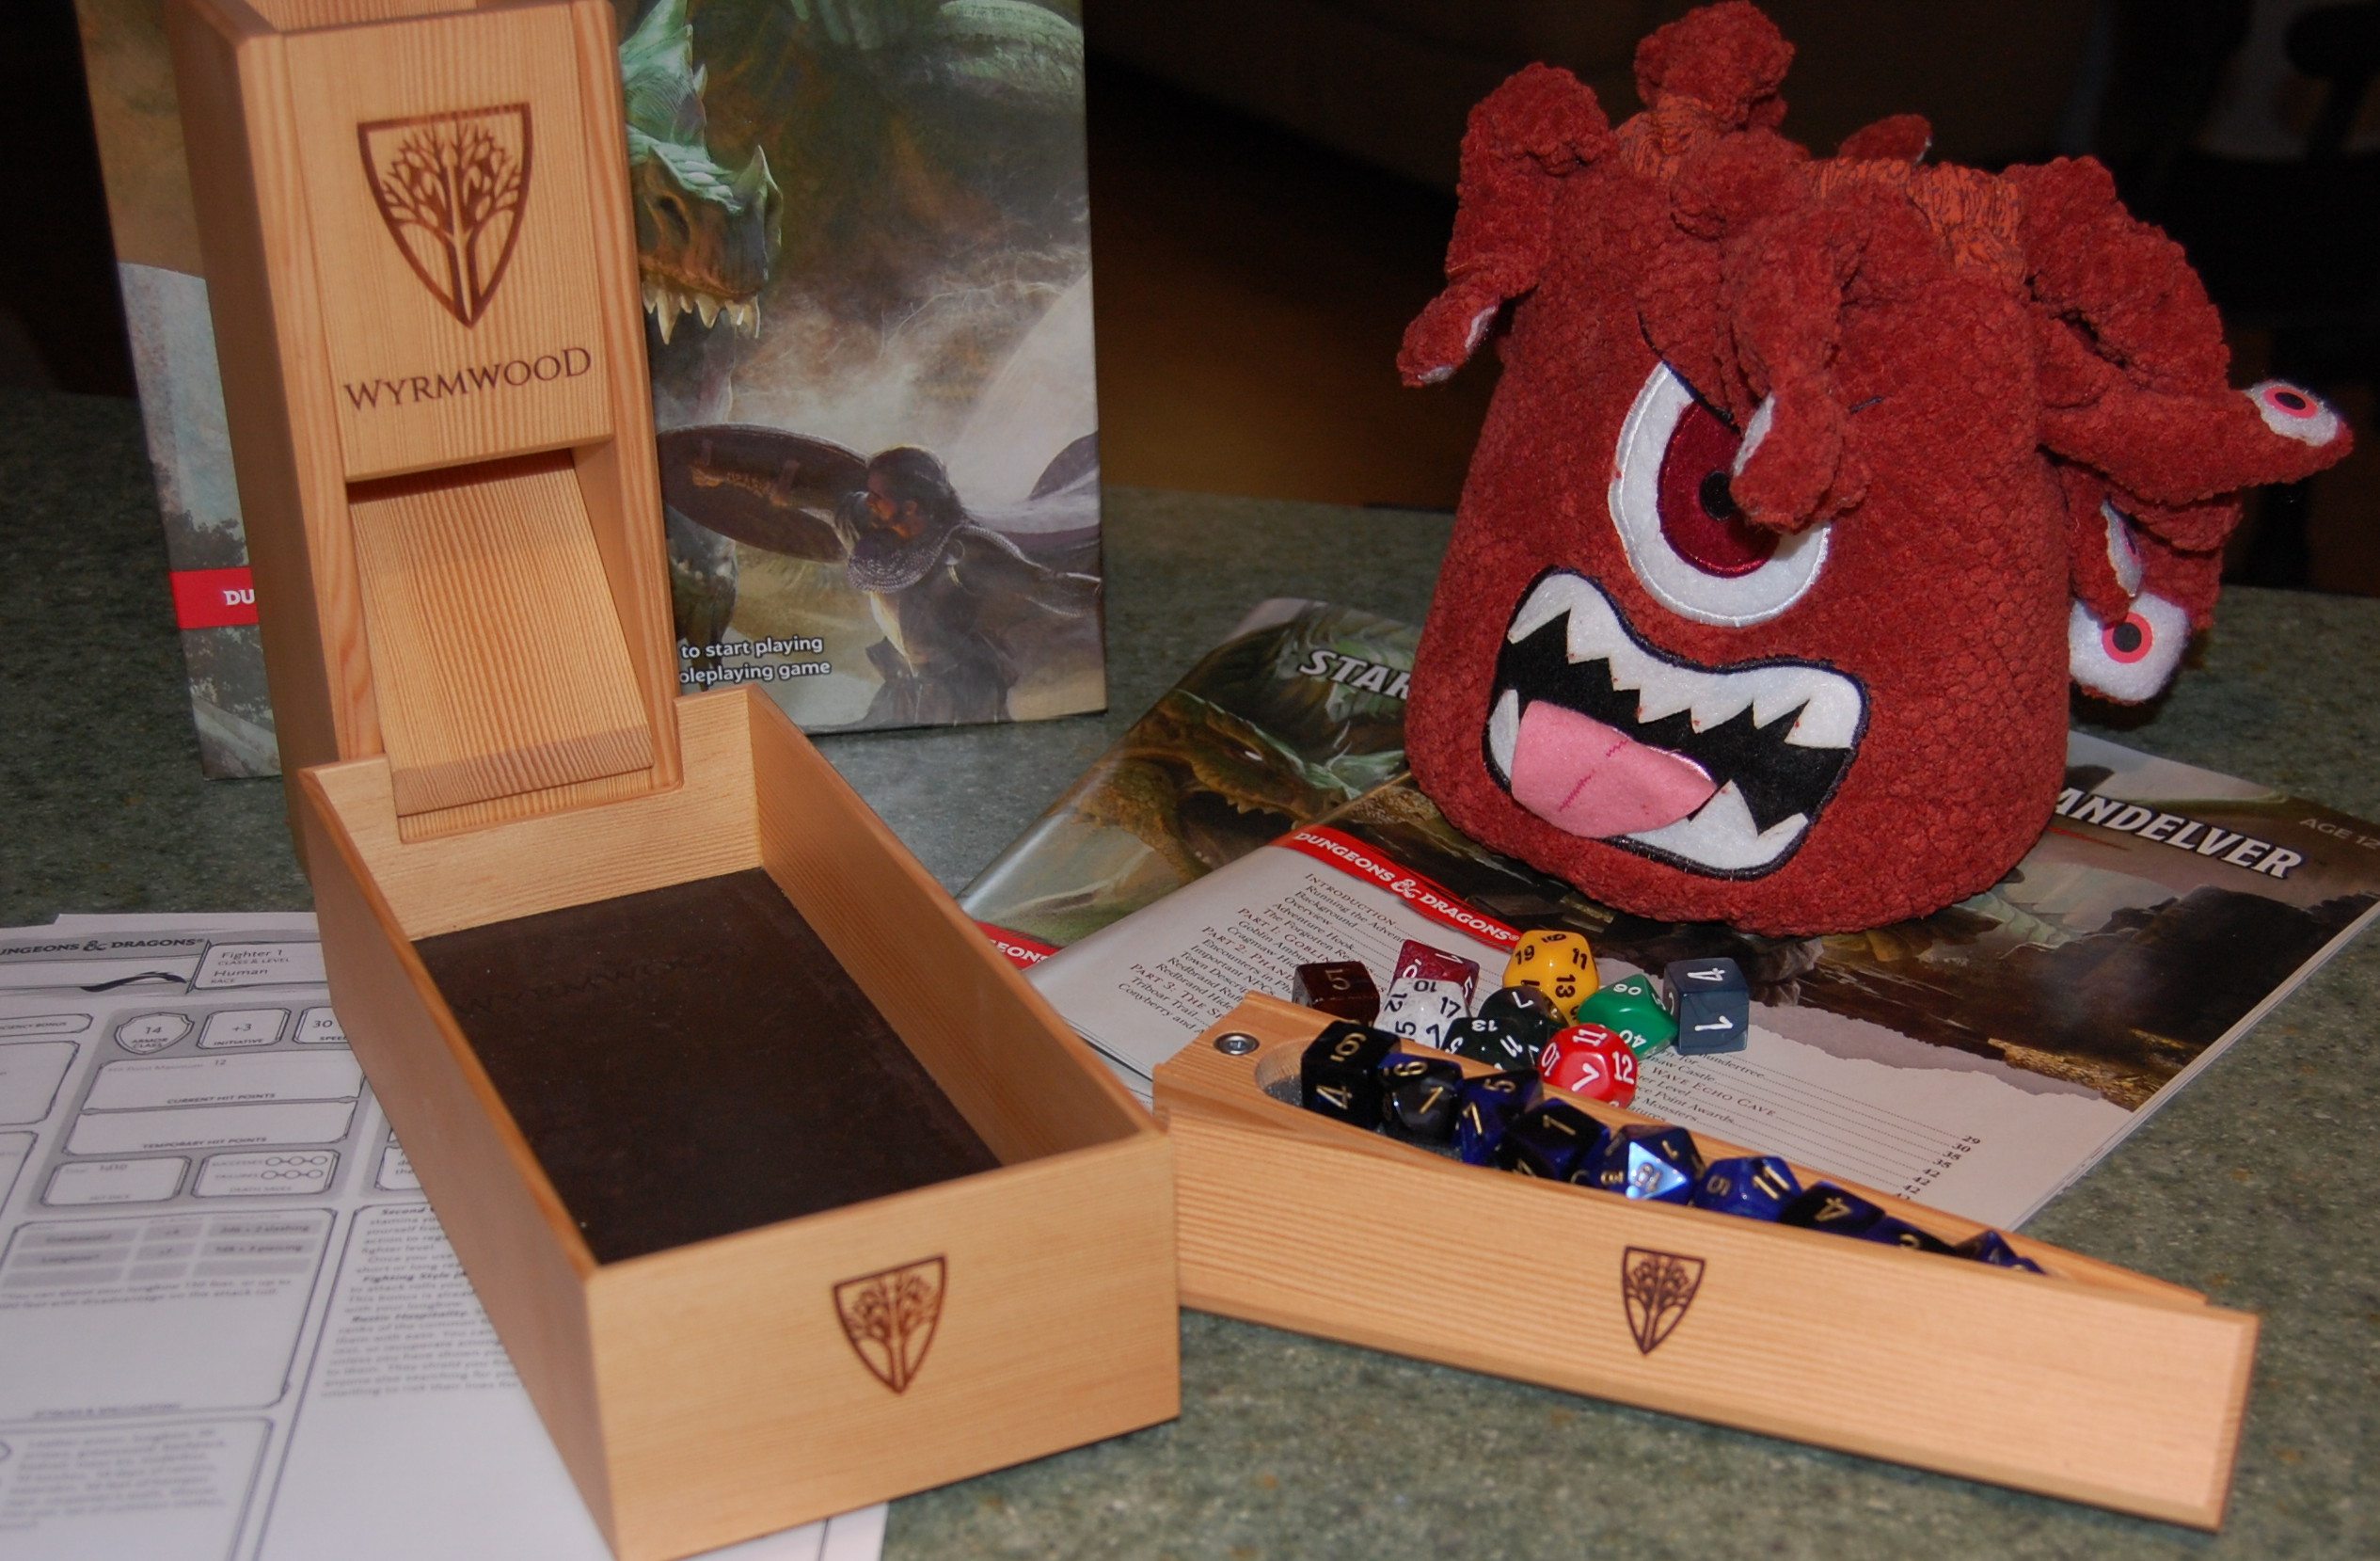 Beholder Dice Bag not Included